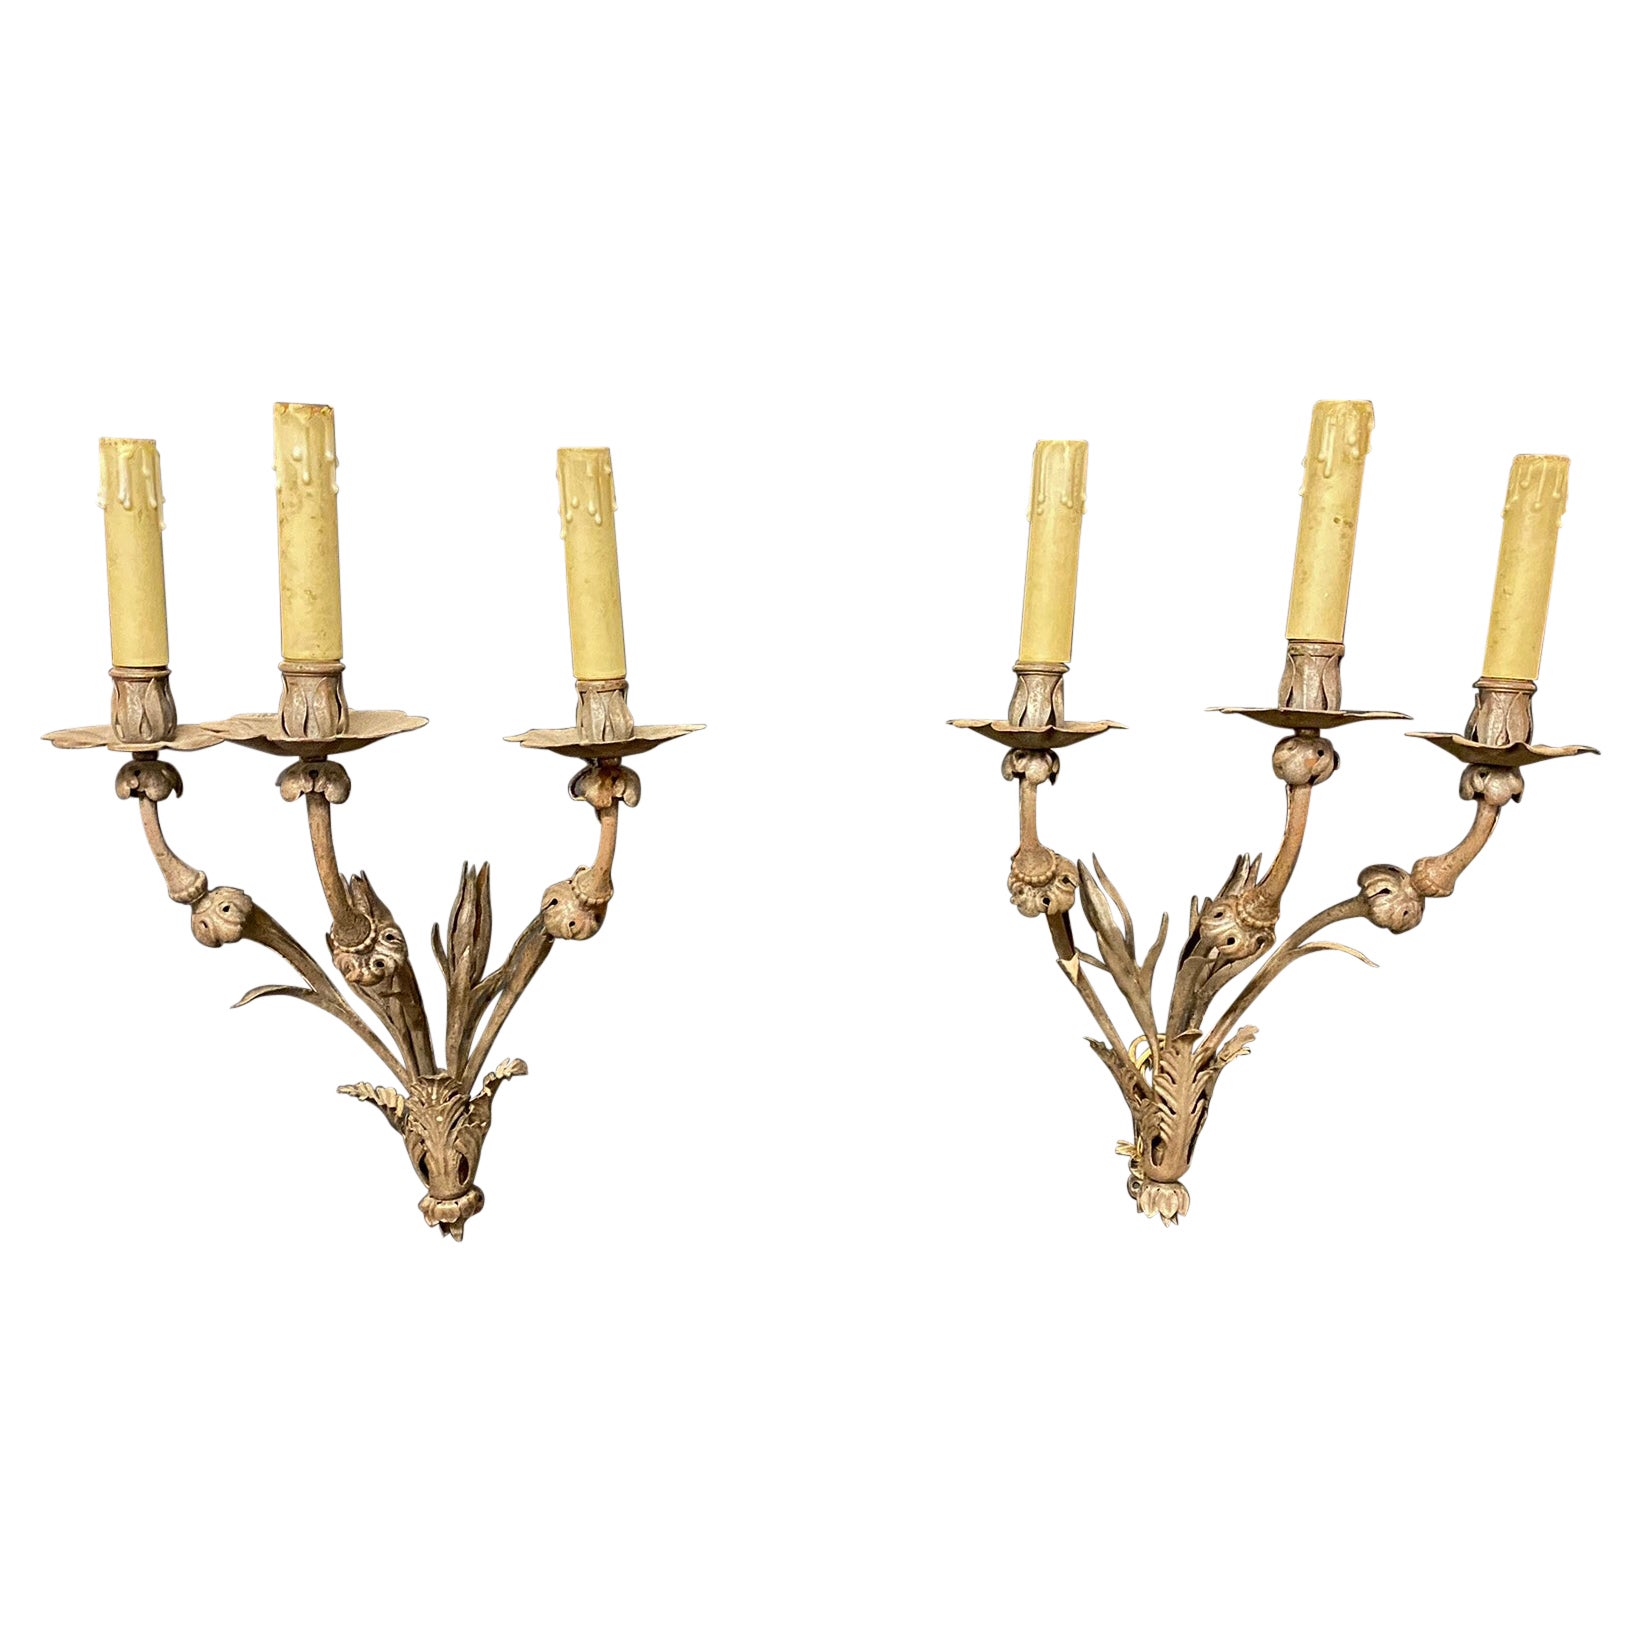 Elegant Wrought Iron Sconces from a Chateau in Central France, circa 1940/1950